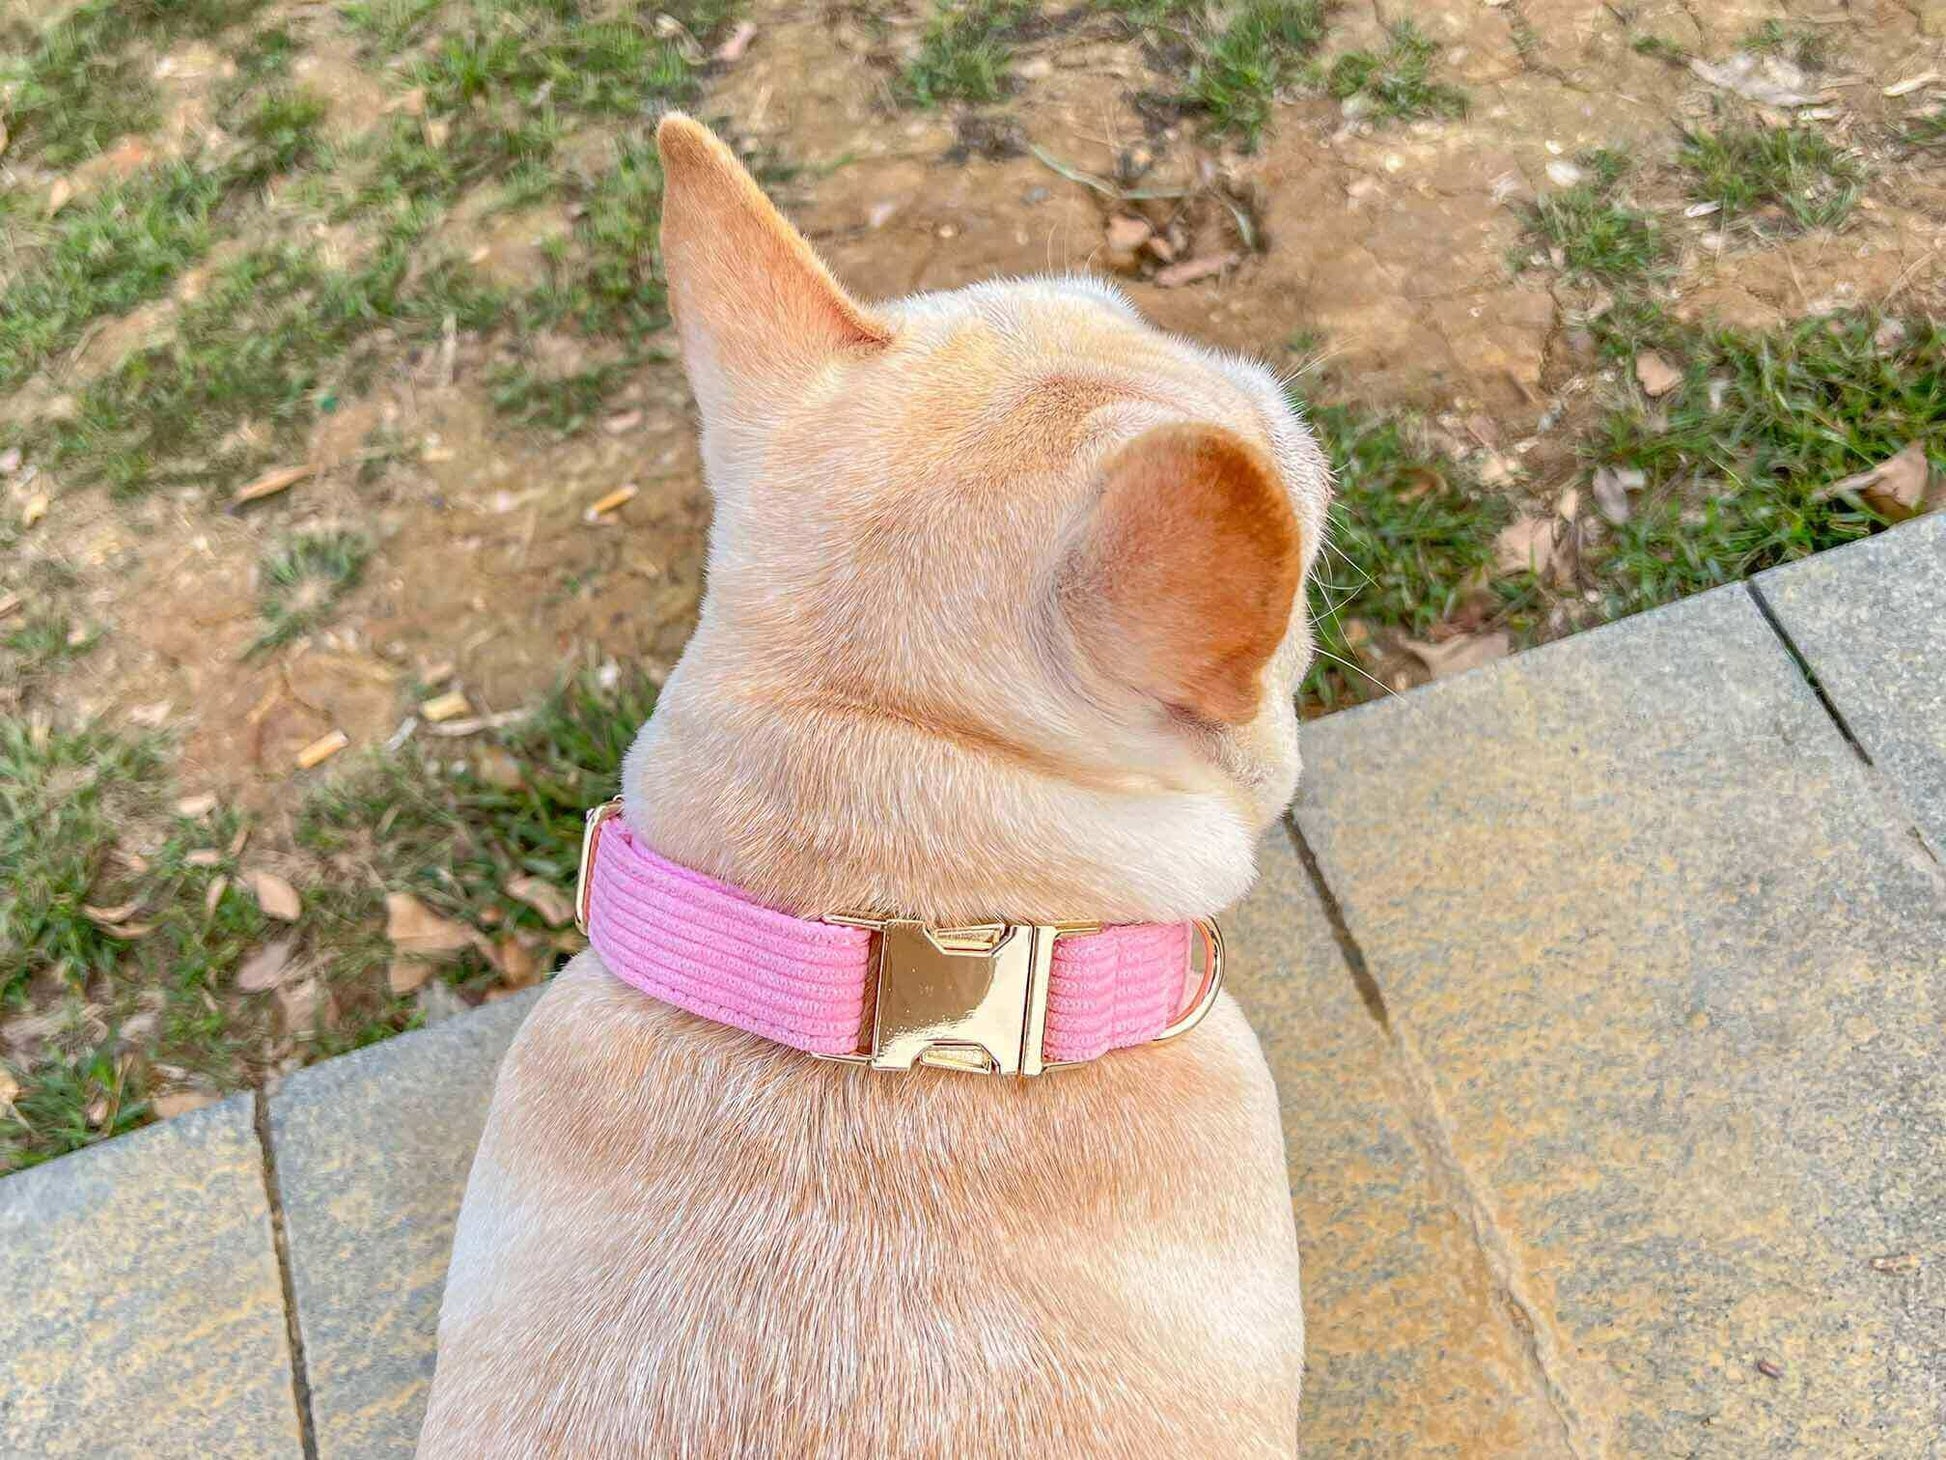 Dog Pink Corduroy Collar - Frenchiely